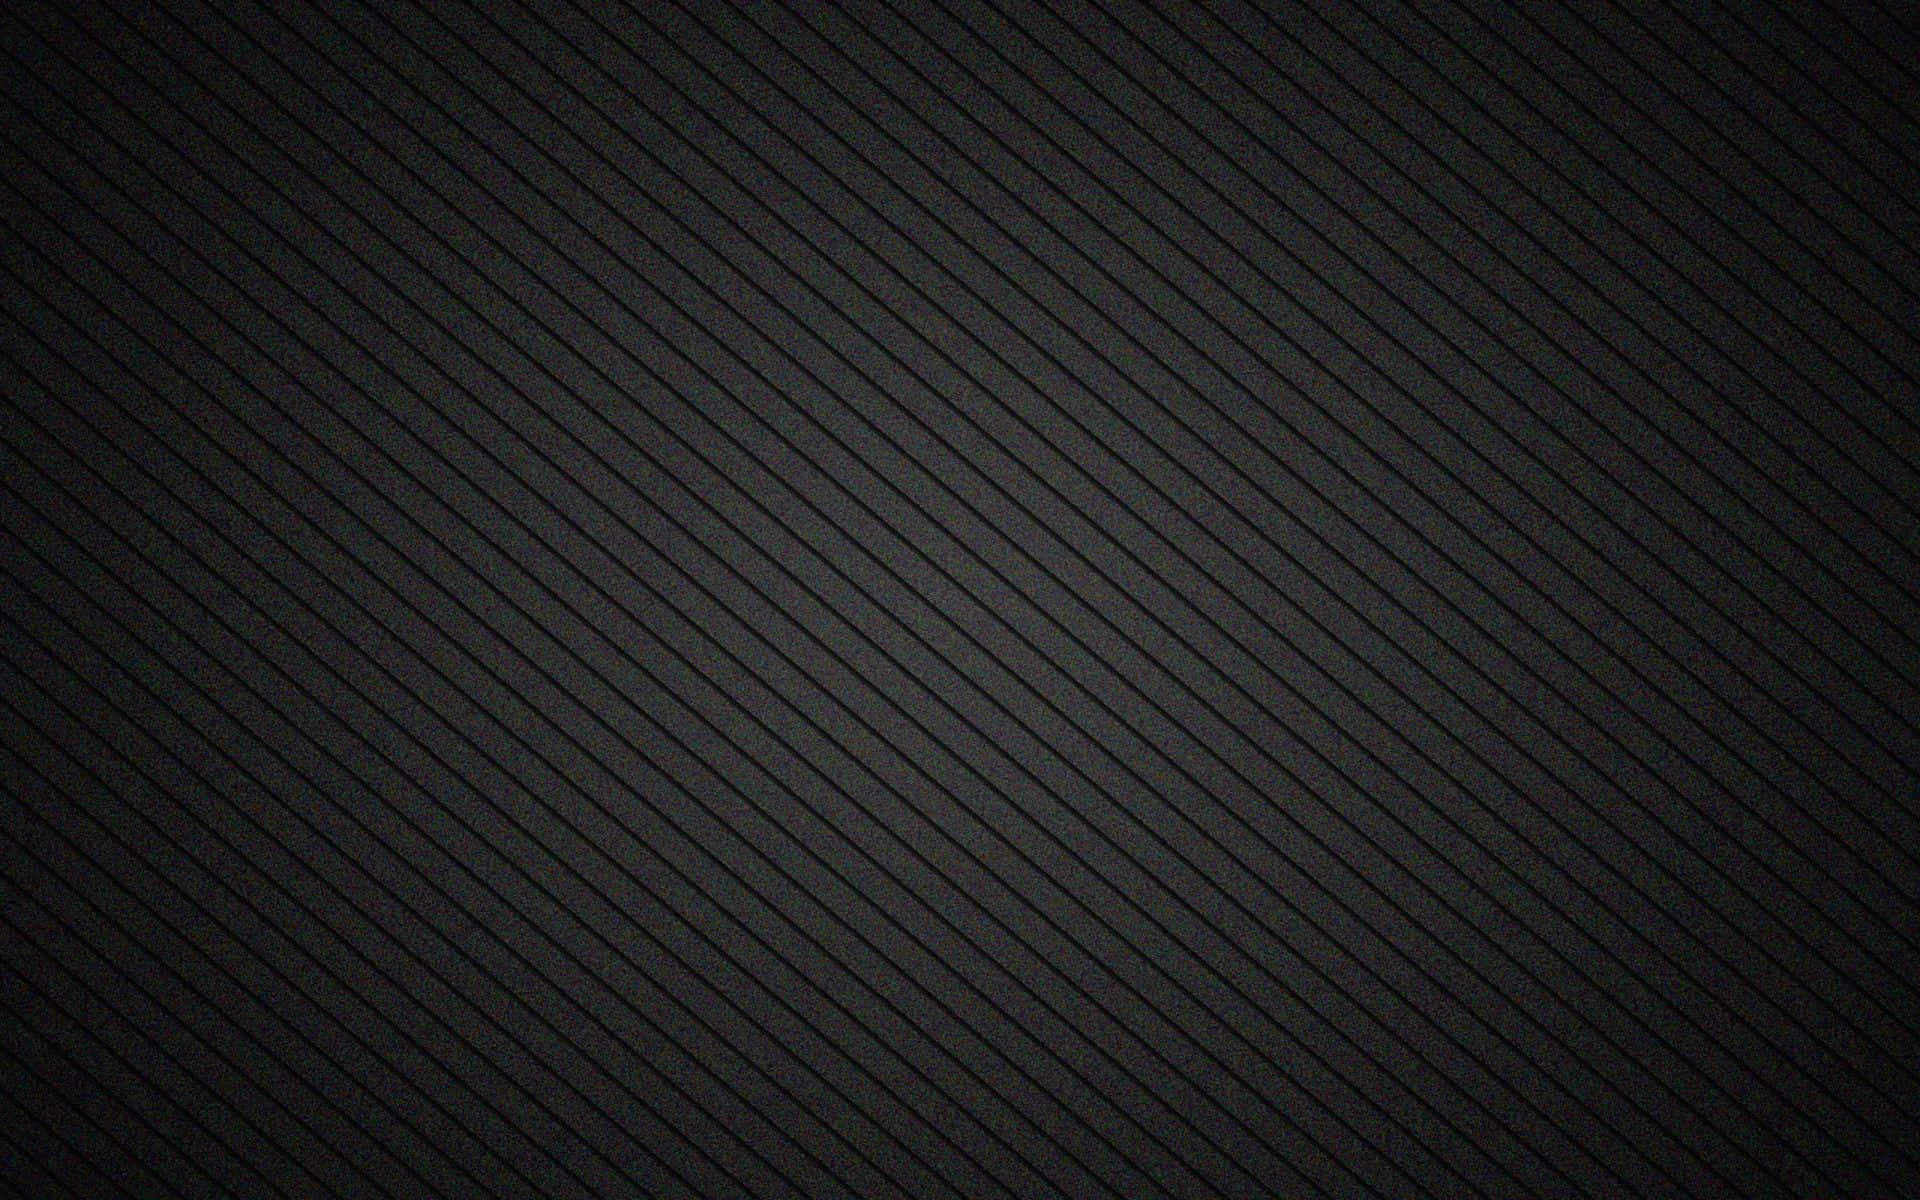 A Black Background With A Striped Pattern